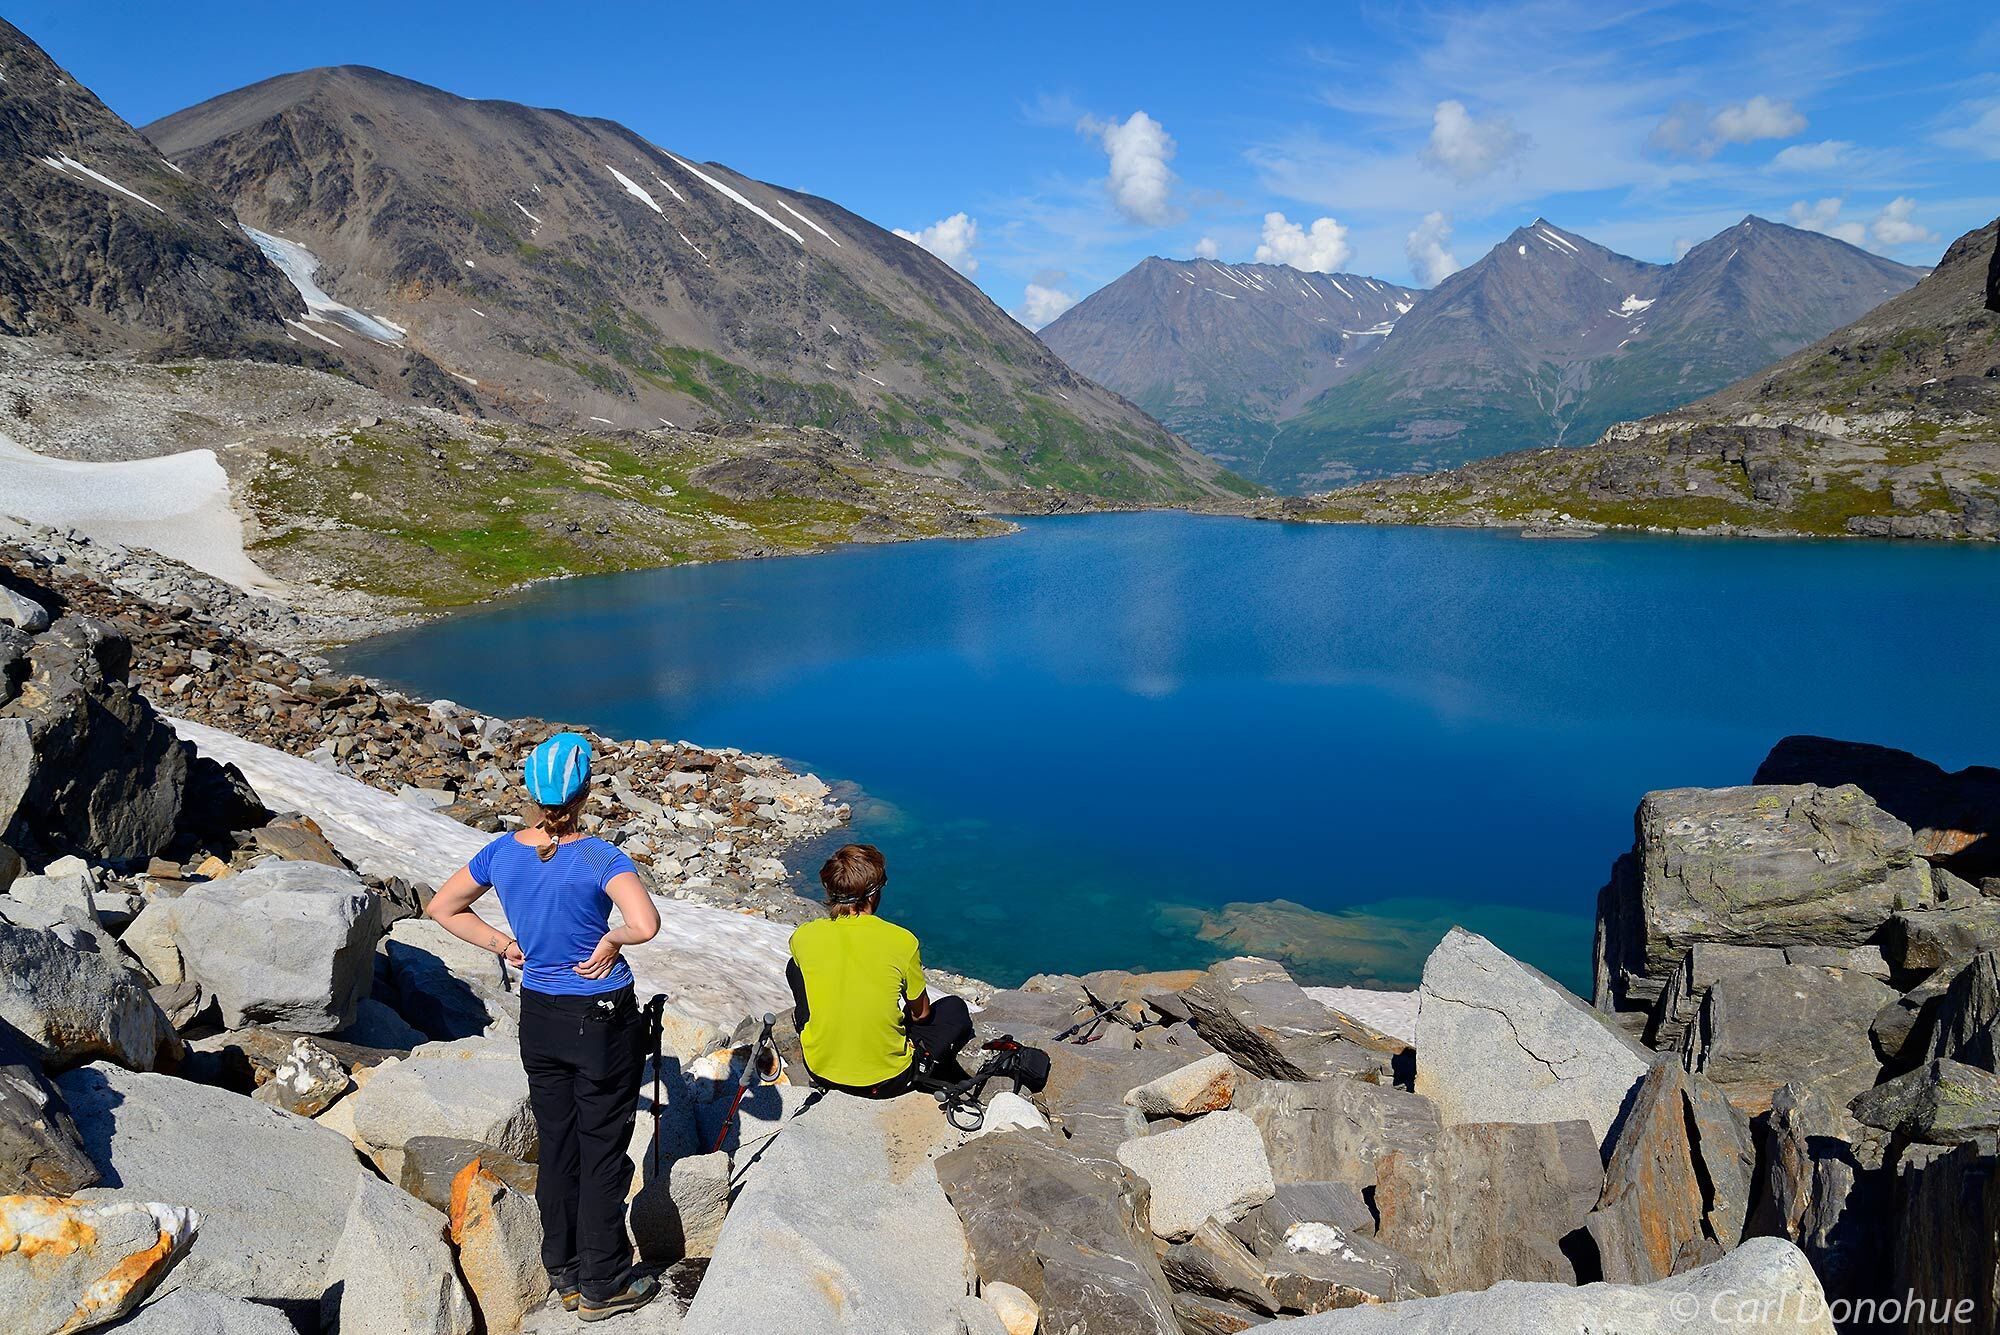 Hikers in the Wrangell - St. Elias National Park backcountry take a break and stop to admire the view of a beautiful little alpine...